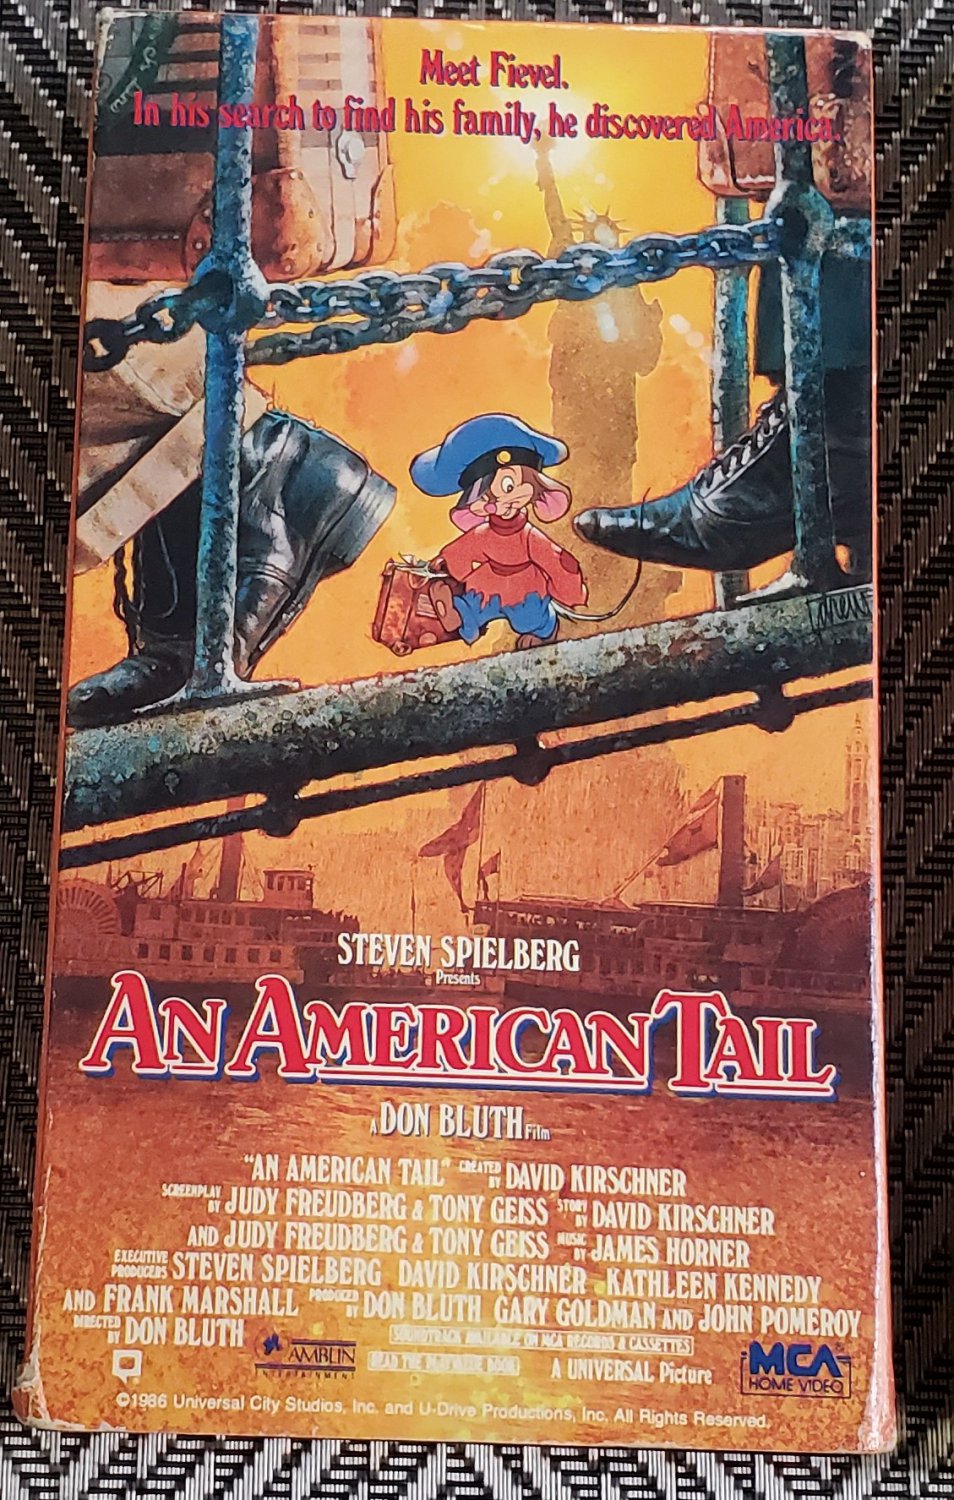 Movie Video Tape VHS Steven Spielberg's An American Tail